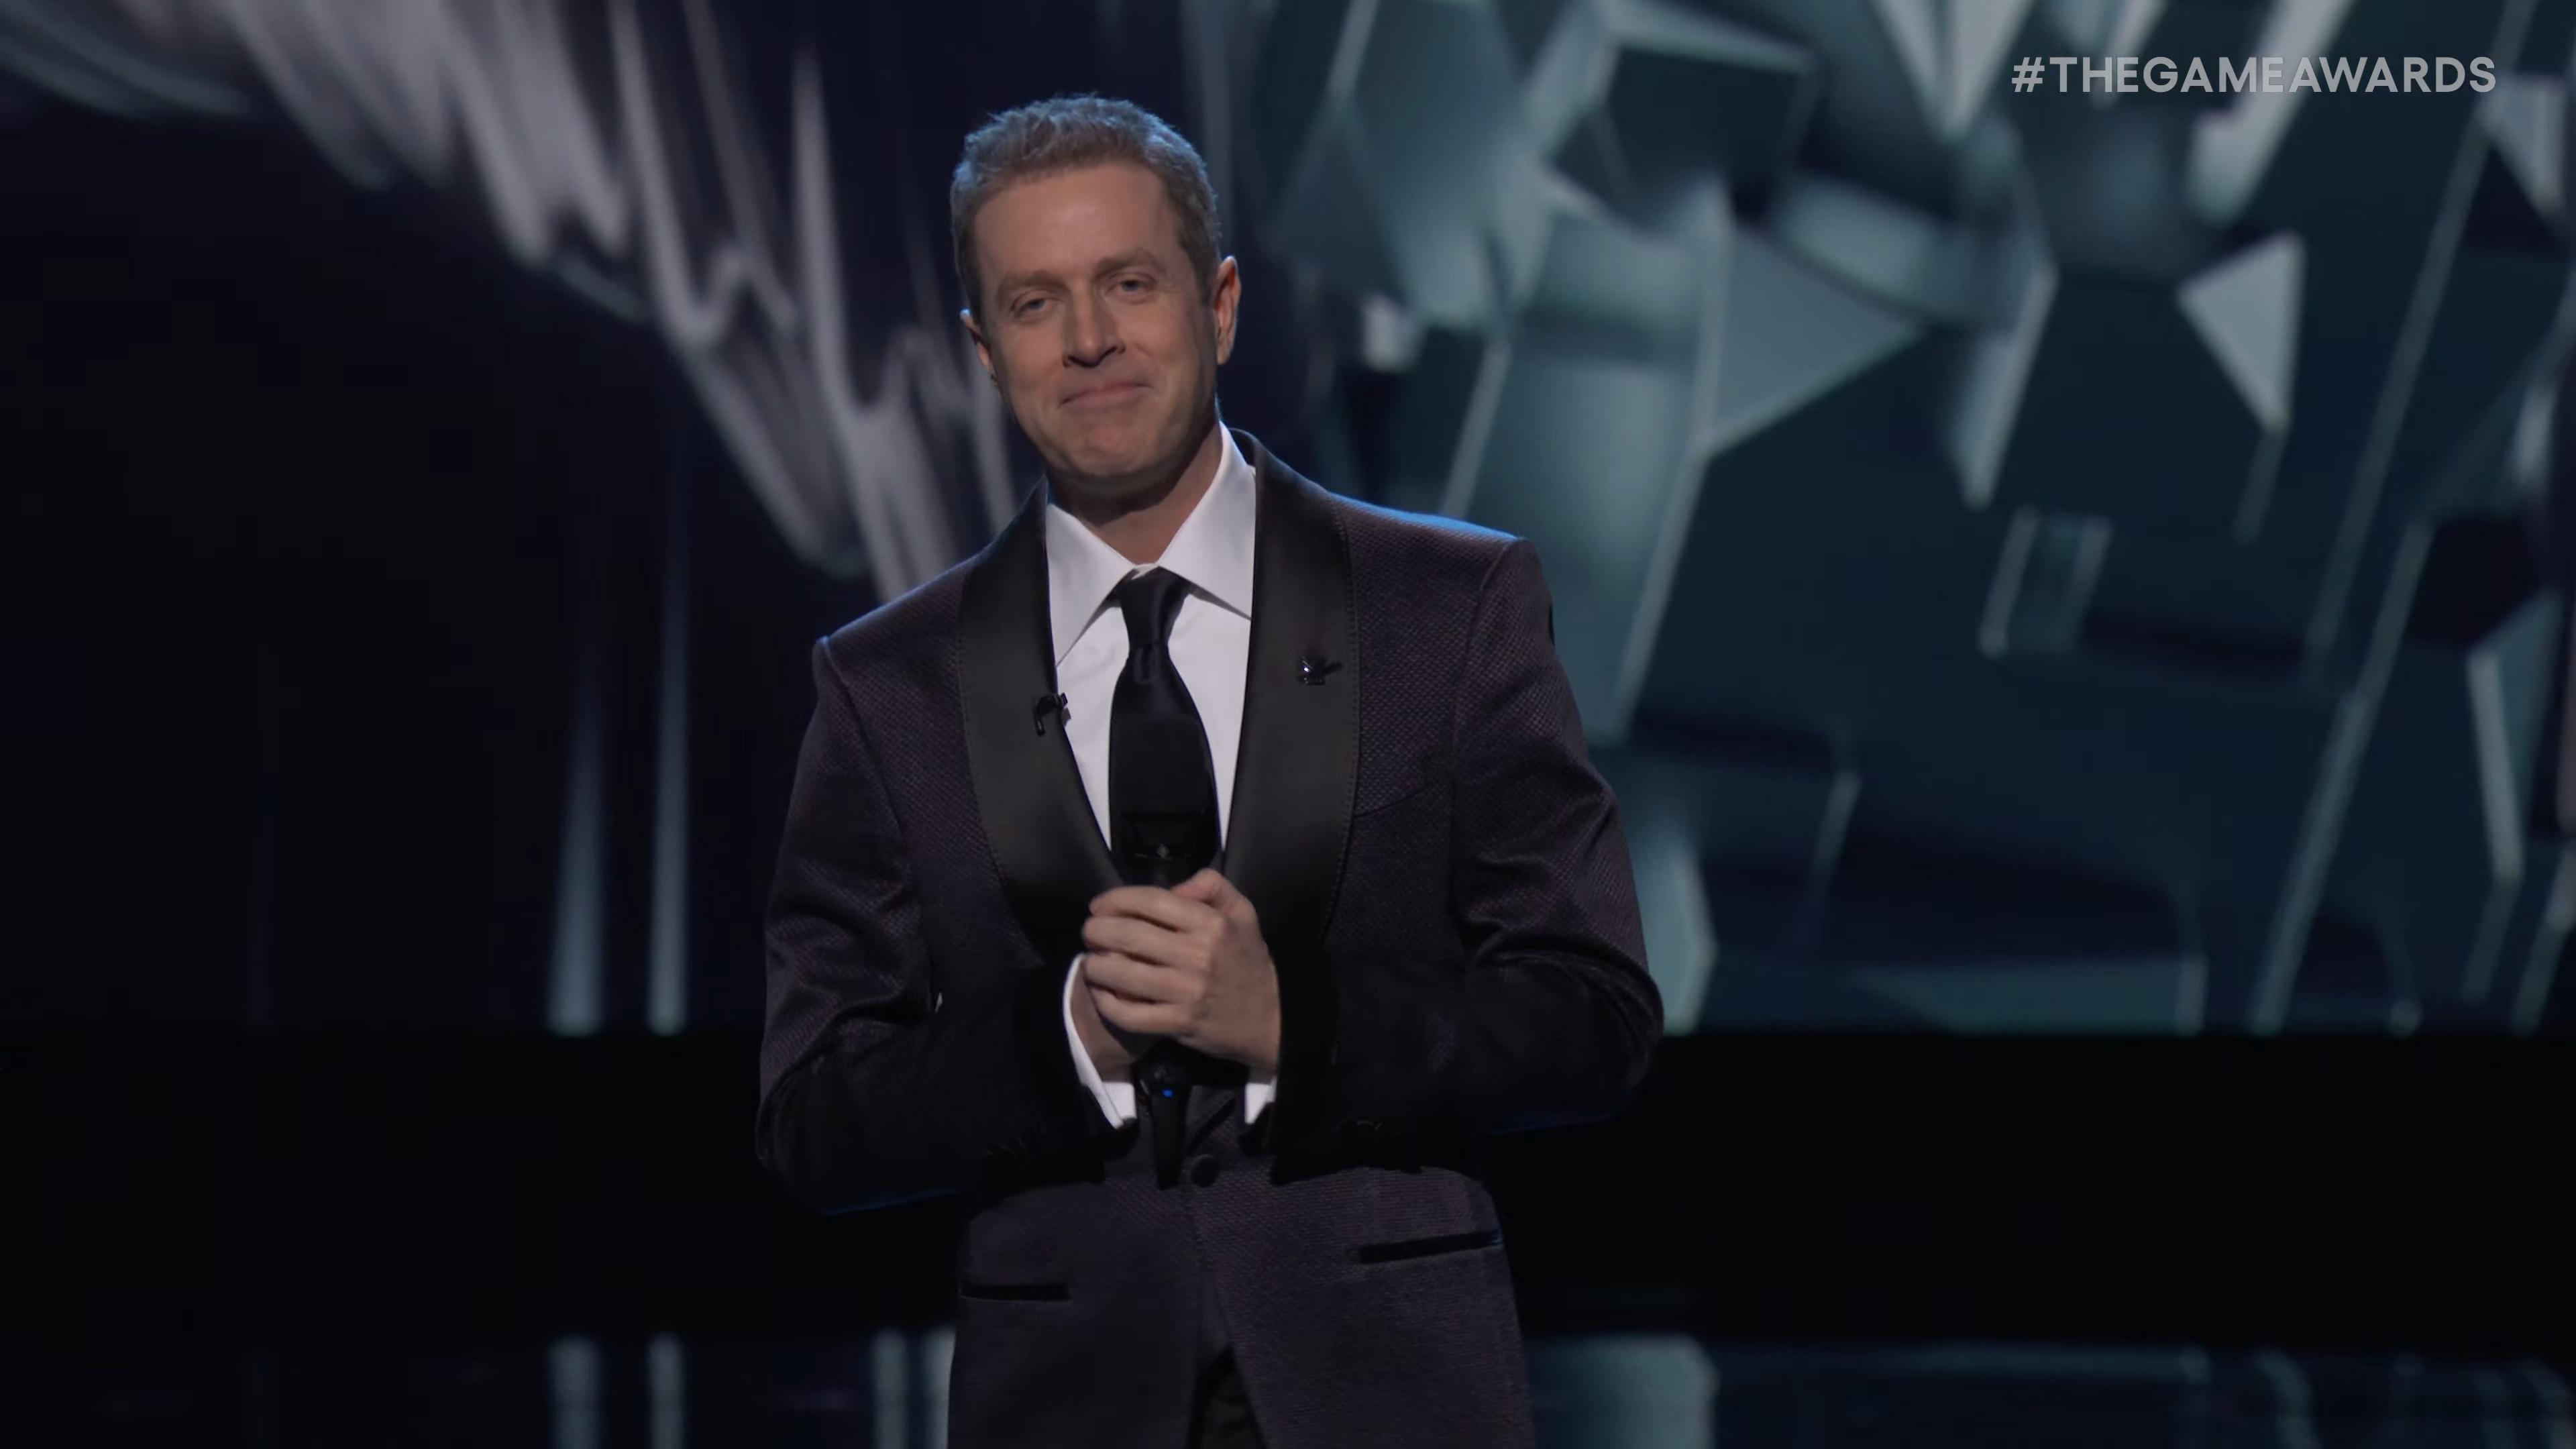 The Game Awards 2022 winners – here are the TGA results